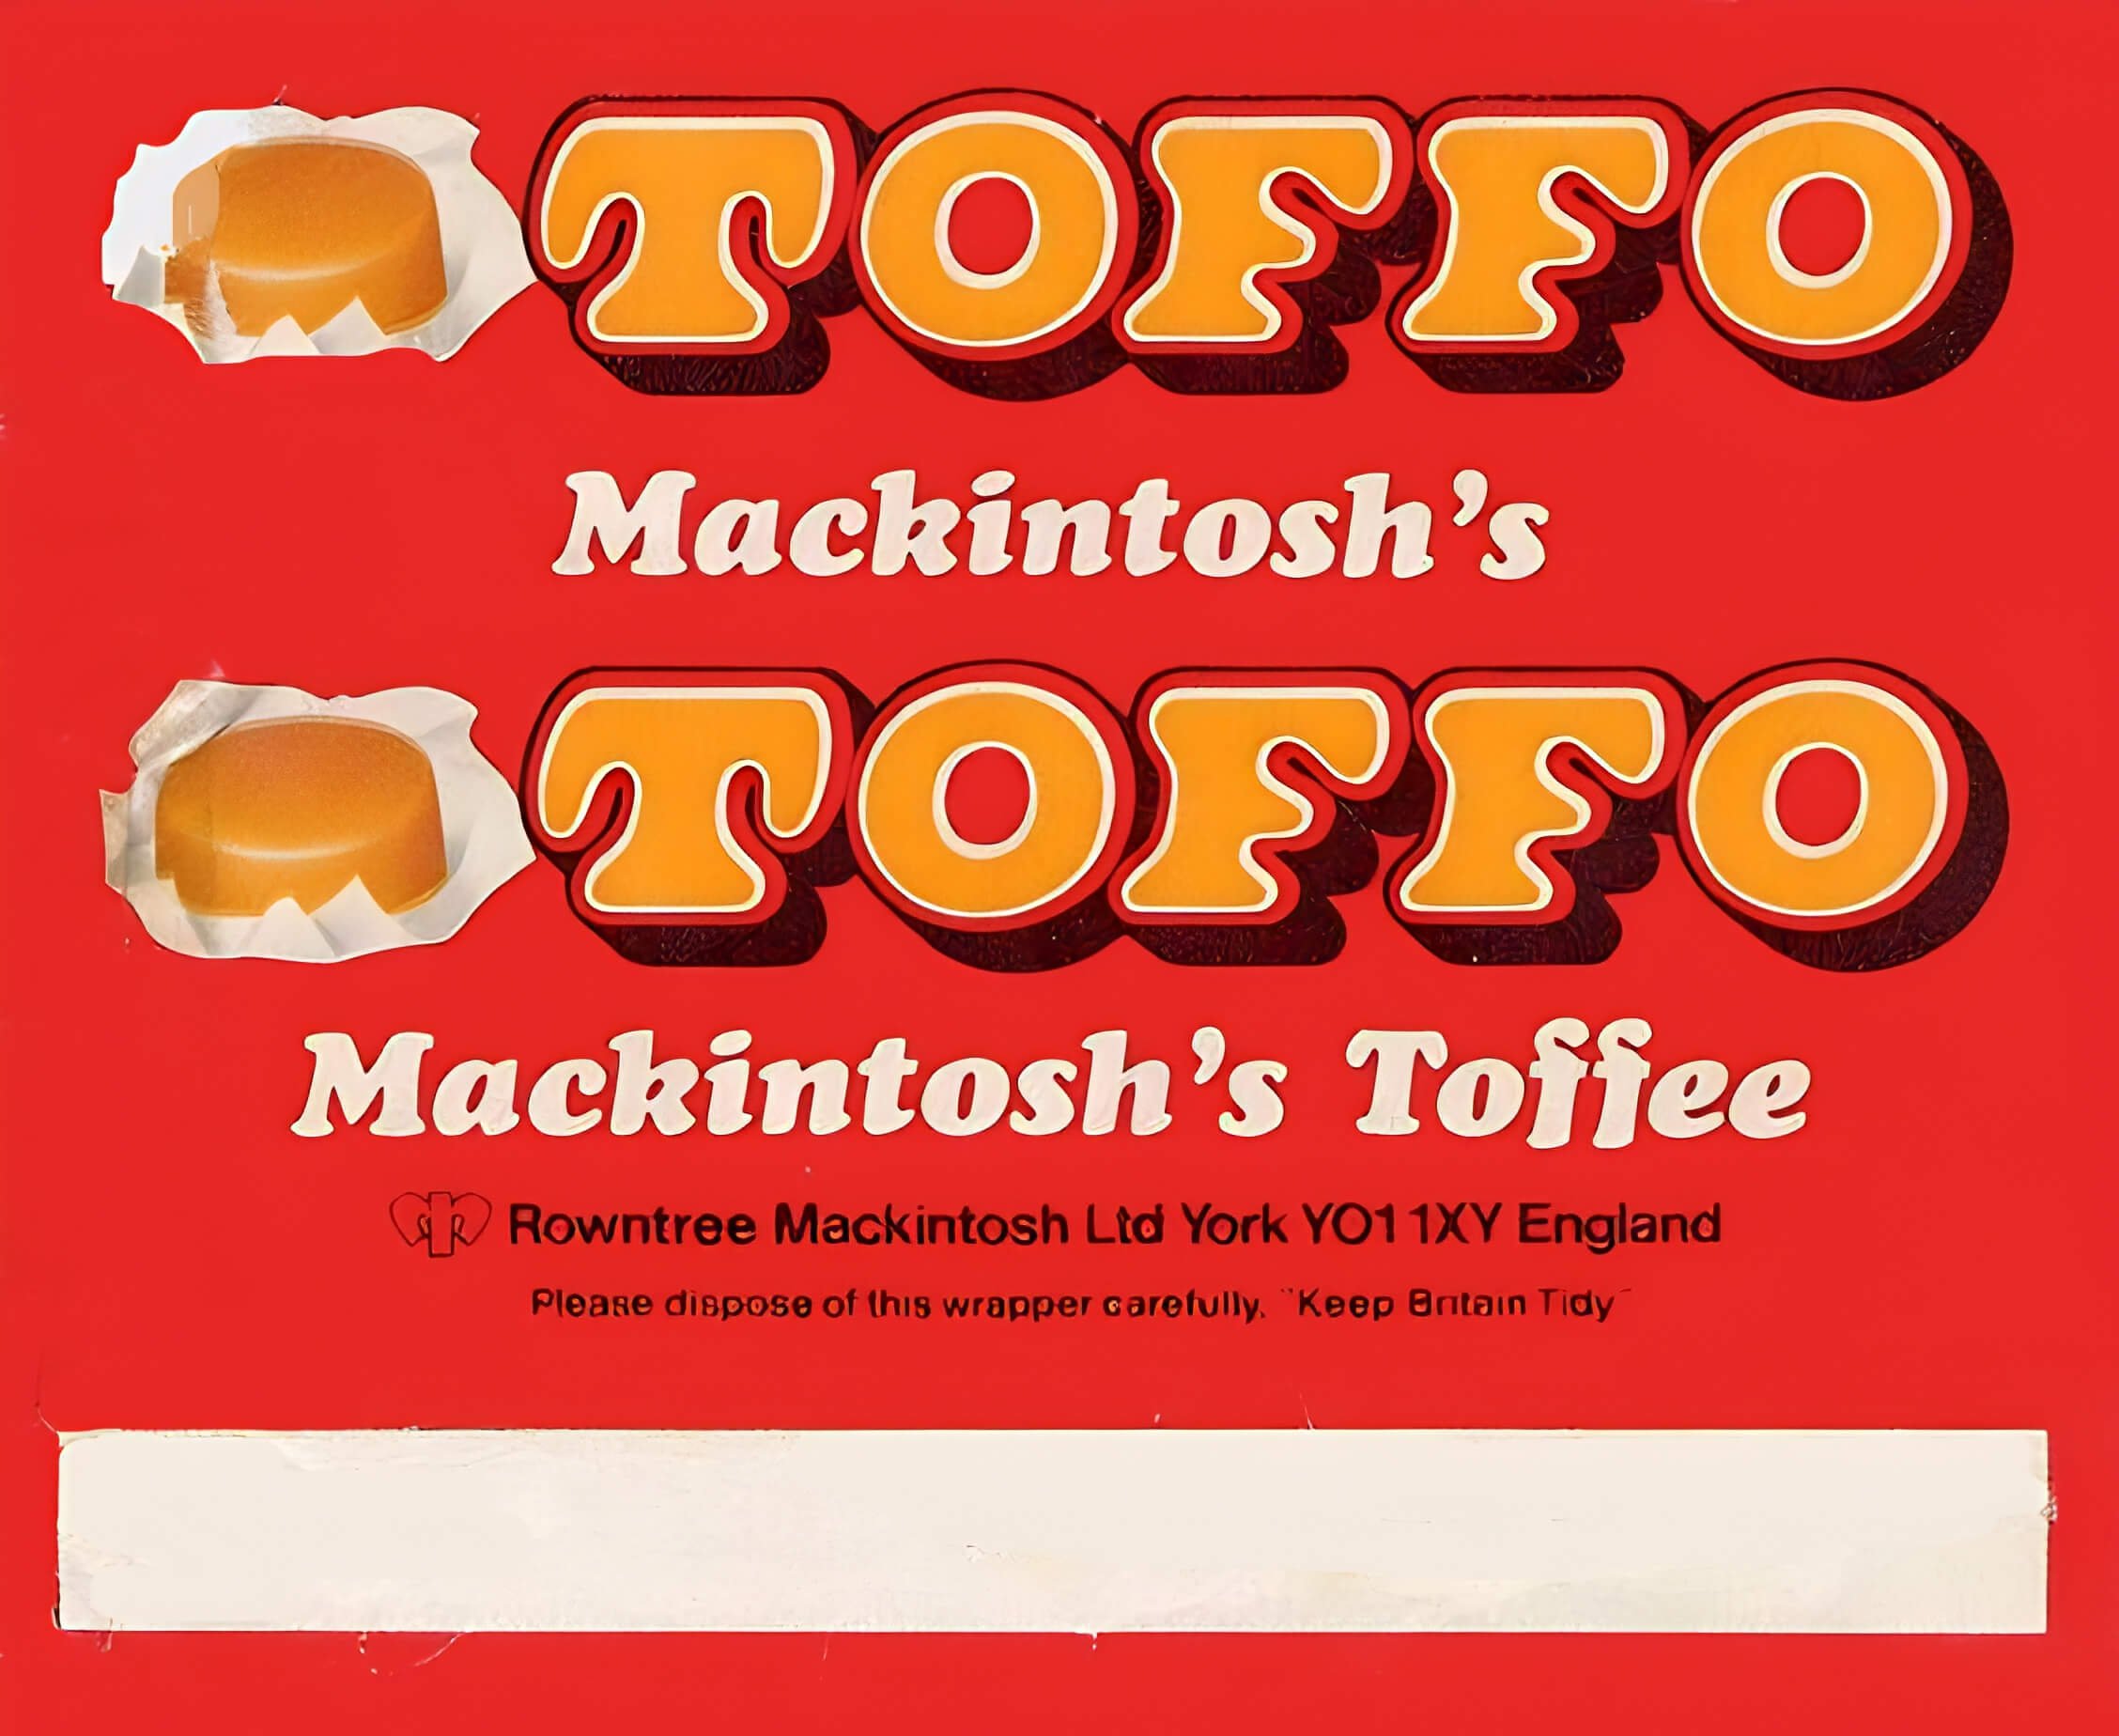 Mackintosh's TOFFO wrapper from the 1970s, red with orange and white lettering